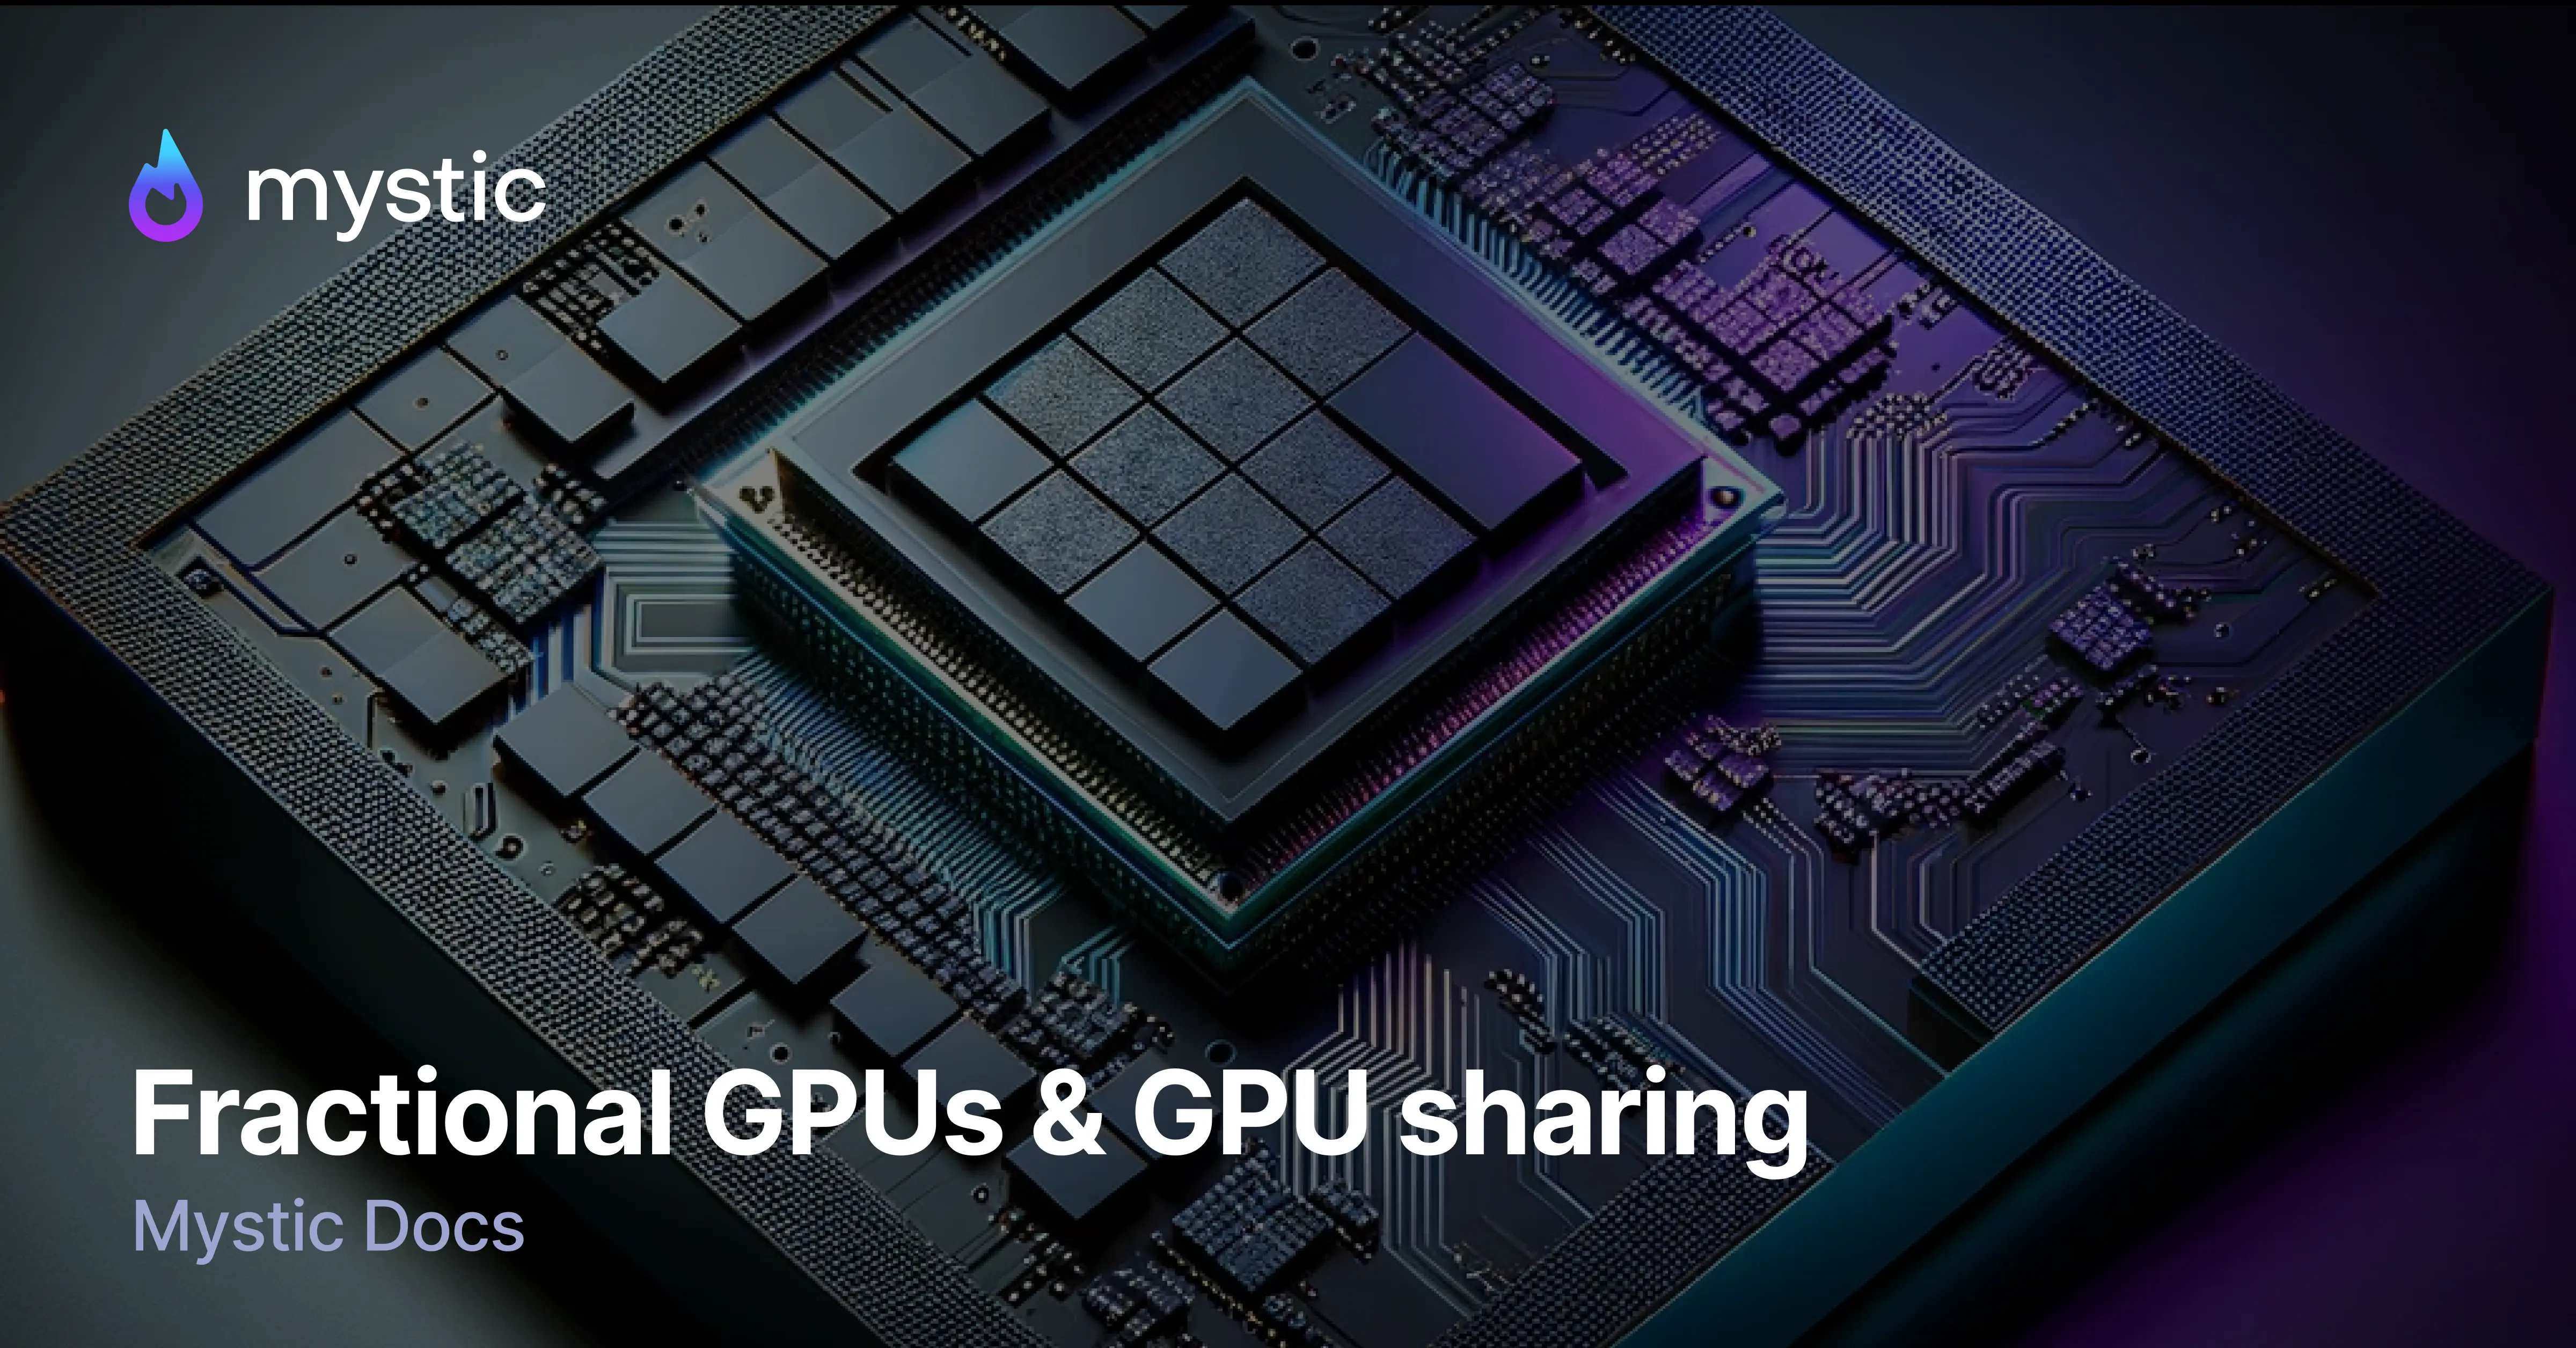 In an ideal world, it's best to run as much as you can on a single GPU. The main limitation here is the amount of memory available. Our productio